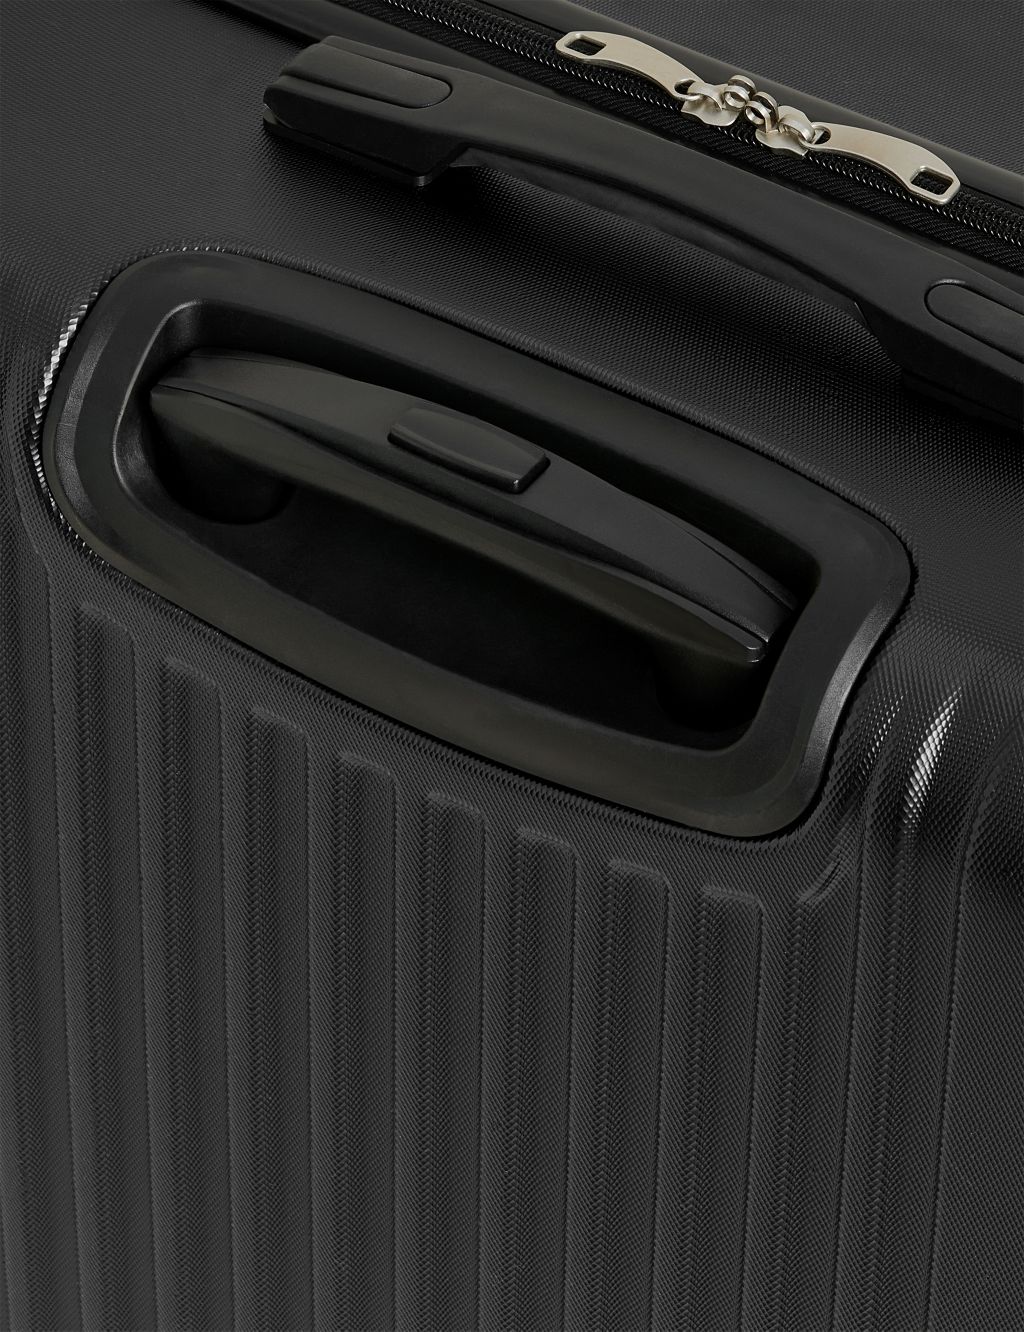 Vienna 4 Wheel Hard Shell Large Suitcase | M&S Collection | M&S